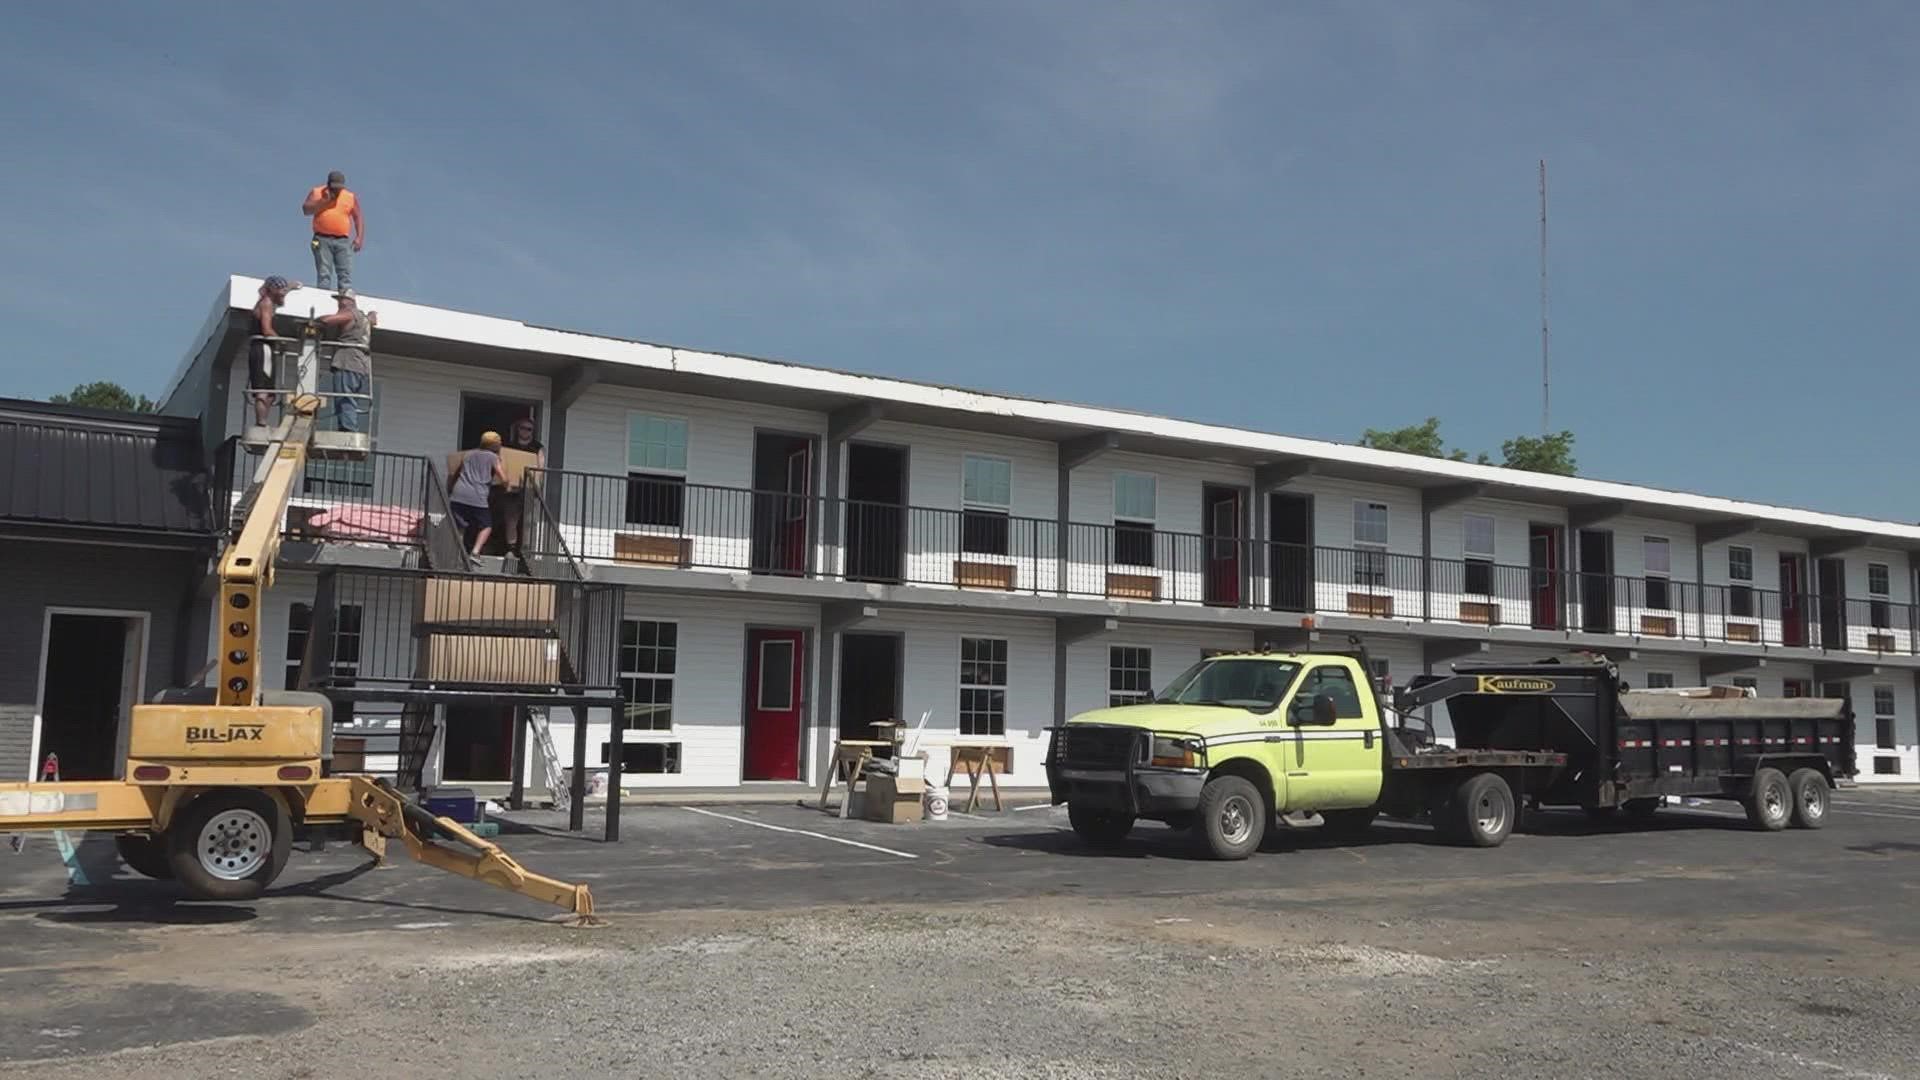 An old motel with an infamous reputation was closed in 2016. Now, it is being transformed into a place where people can recover from addiction together.